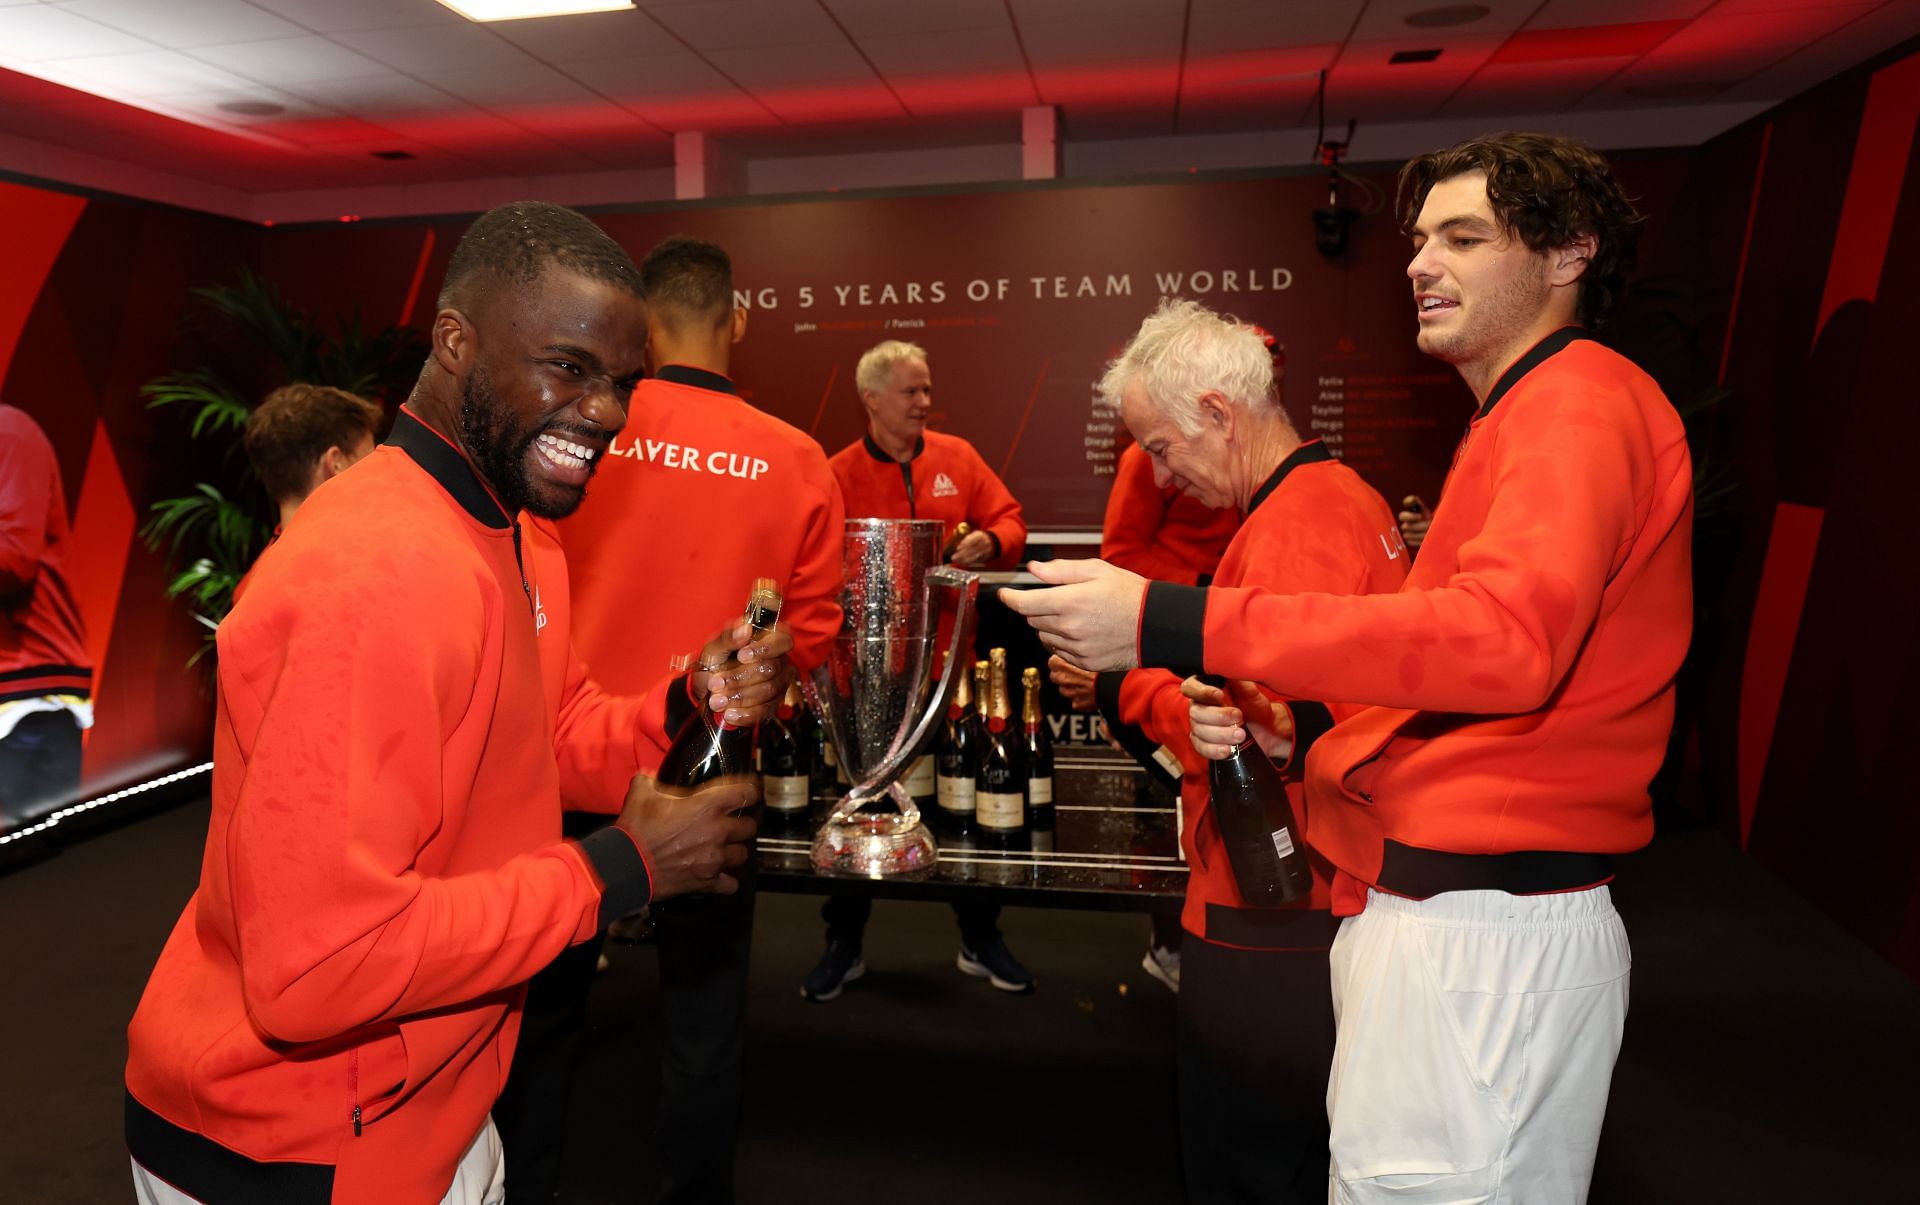 Frances Tiafoe and Taylor Fritz celebrate team World&#039;s victory at the United Cup